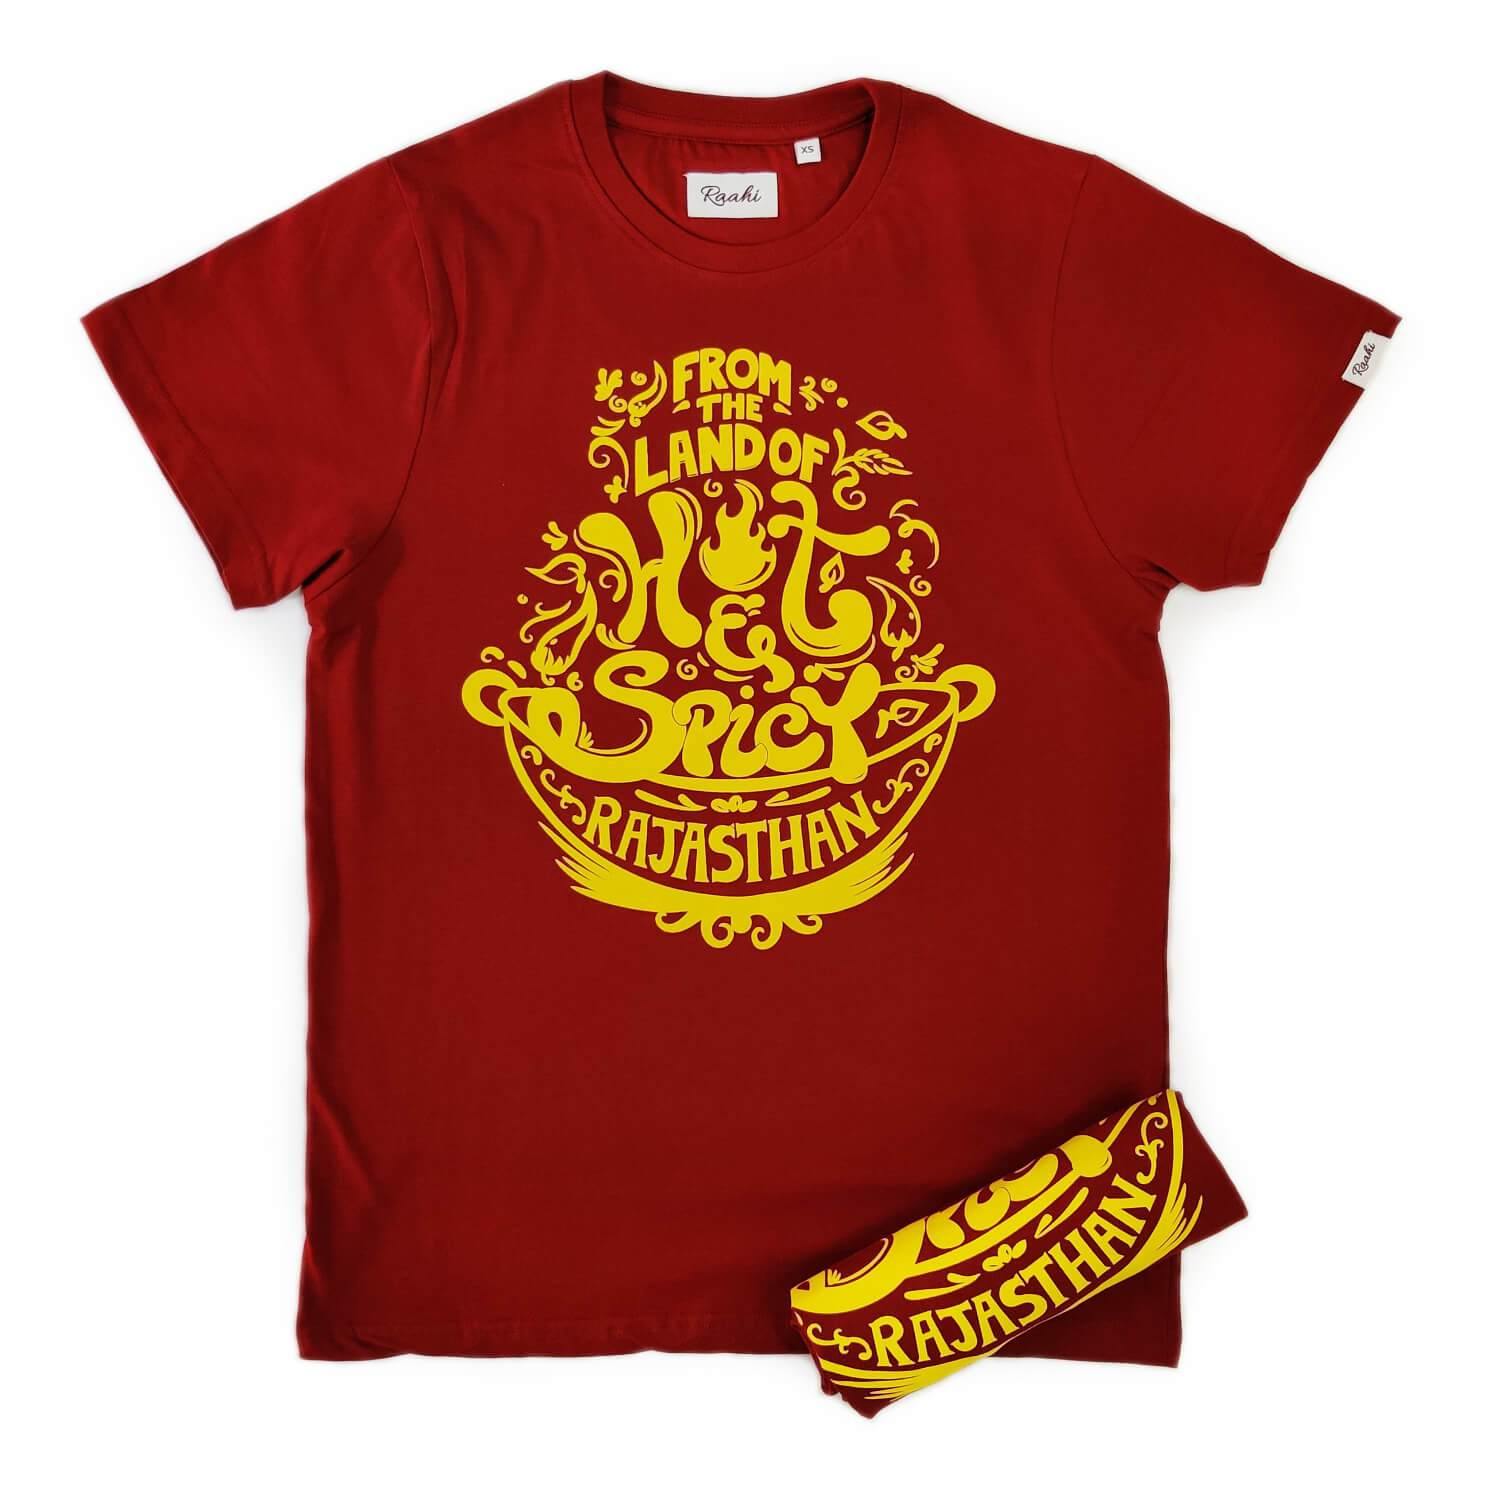 Land of Hot & Spicy Rajasthan - Red T-Shirt - Raahi